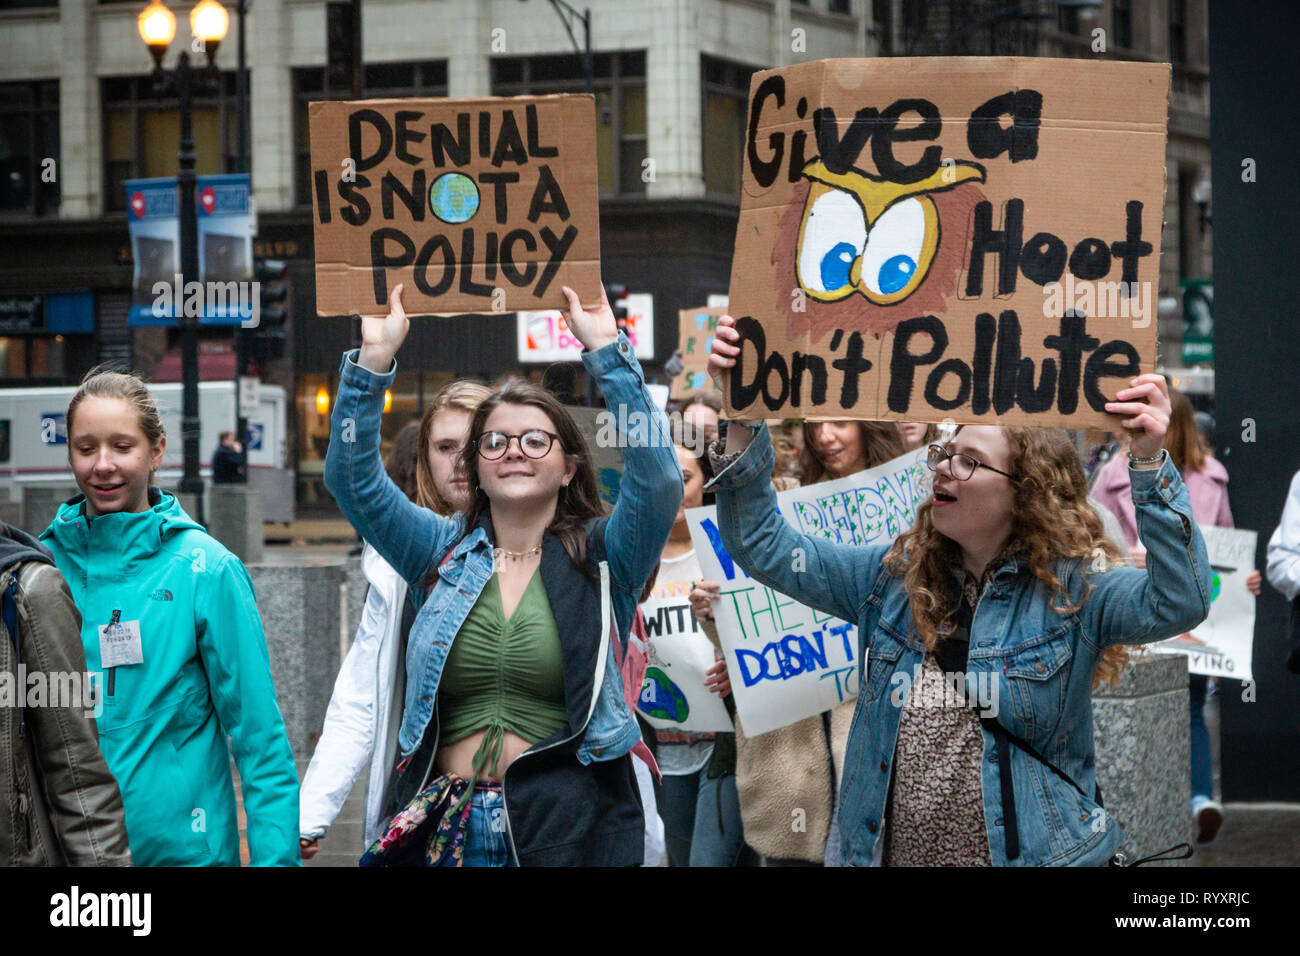 Chicago, USA. 15th Mar, 2019. As part of the world wide 'Youth Climate Strike' a spirited group of Chicago area young folks left their schools this morning, gathered near the Field Museum and marched through Grant Park to Federal Plaza in the loop, chanting their commitment to ending the threat of climate change. In the plaza, young speakers, mostly students from area high schools, exhorted the crowd to hold the government accountable by 'registering to vote, showing up at the polls, and voting them out'  if elected officials deny that climate change is a threat. Credit: Matthew Kaplan/Alamy L Stock Photo